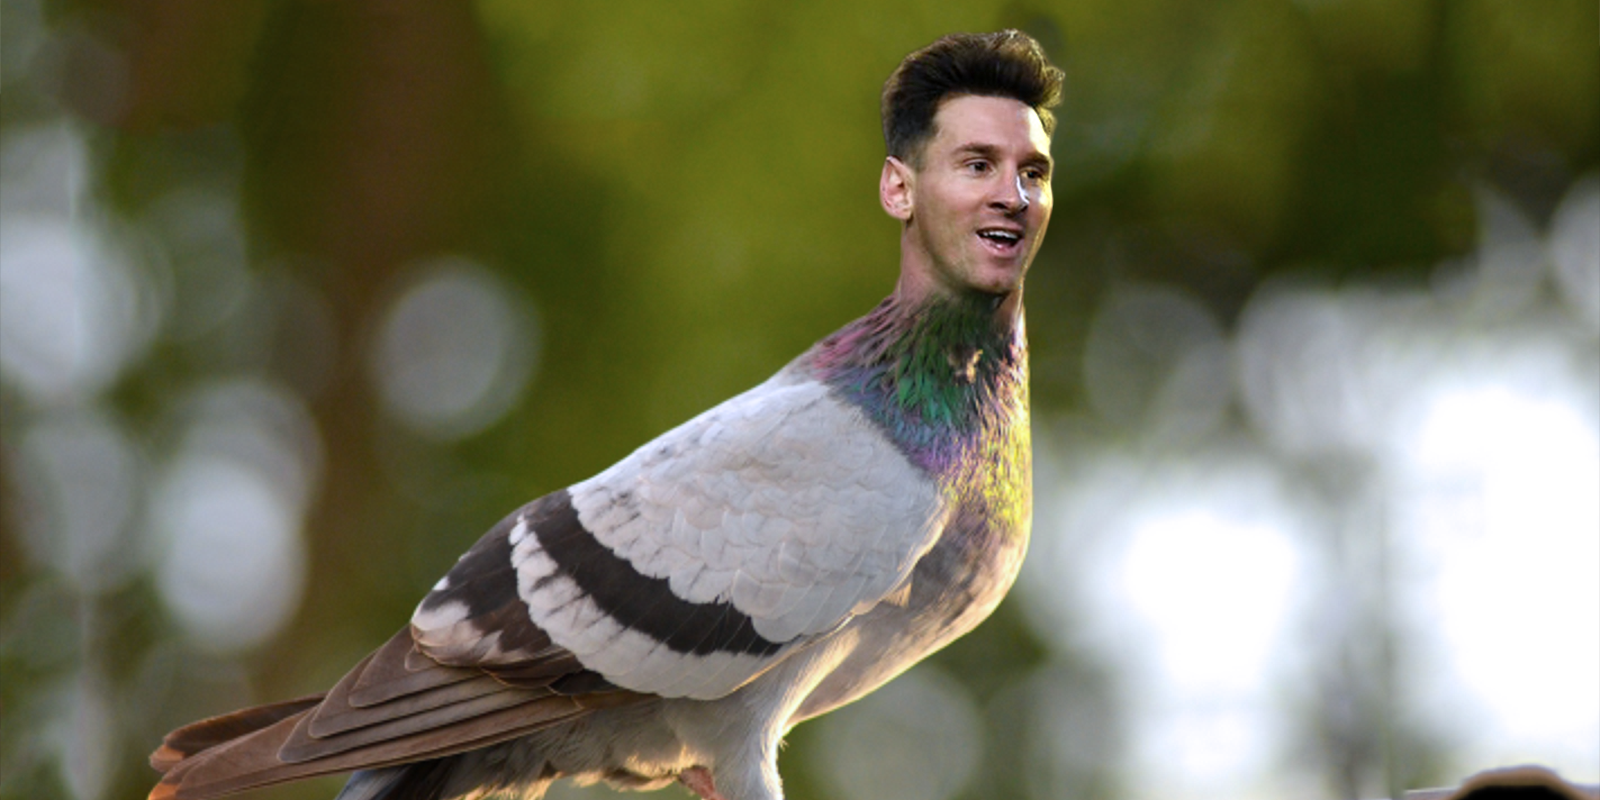 €1.25 milliún tugtha ar ‘Lionel Messi of pigeon racing’…